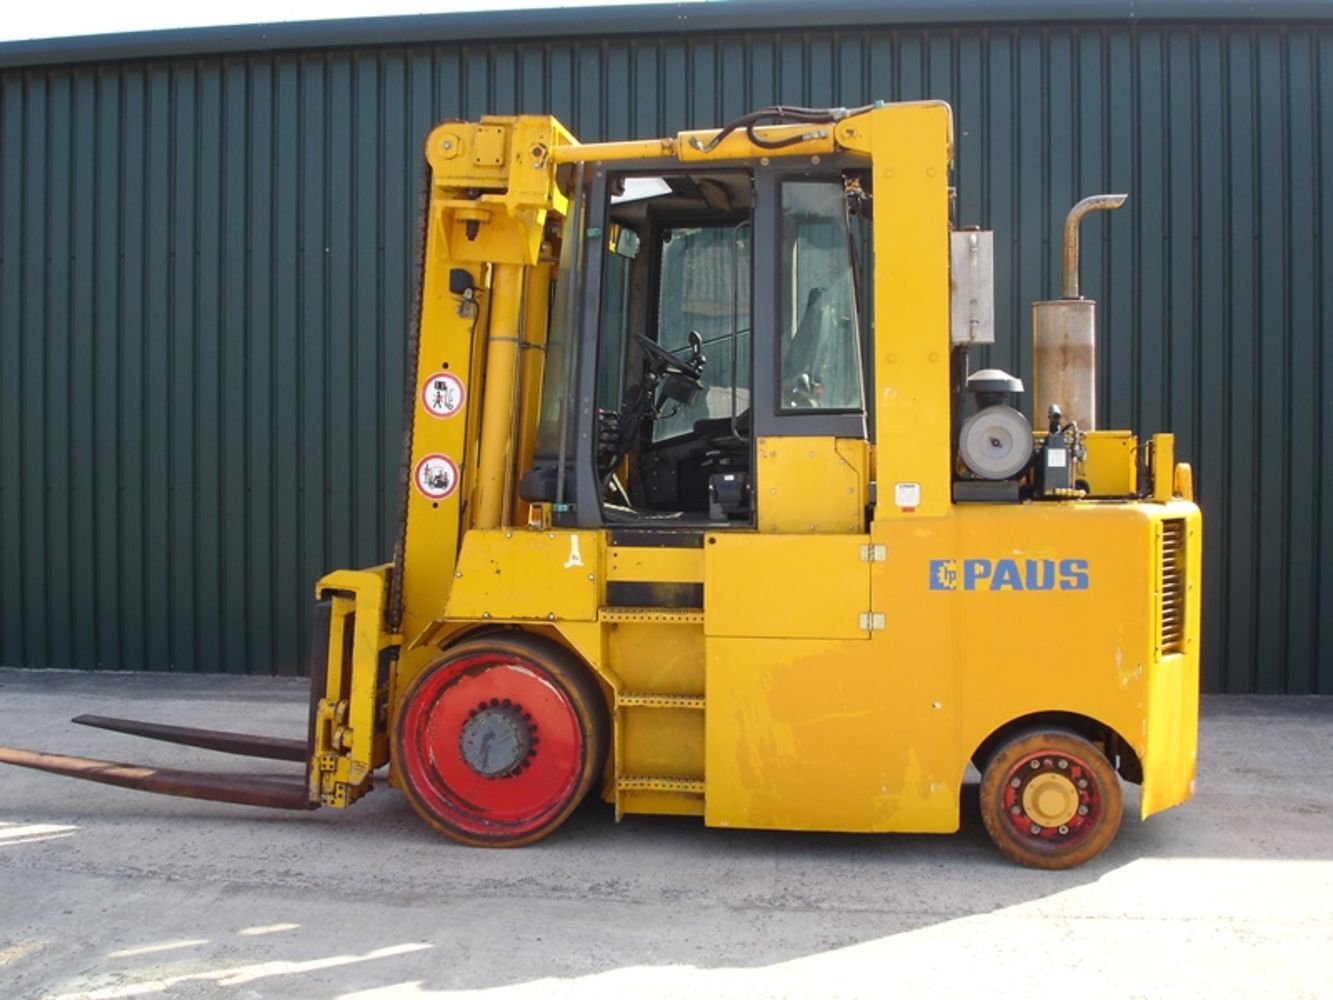 Selection of Forklifts, Electric Pallet Movers, Compressors, Metalworking Machinery & more.LOADING FREE OF CHARGE ON MOST ITEMS.SEE LOT DETAILS